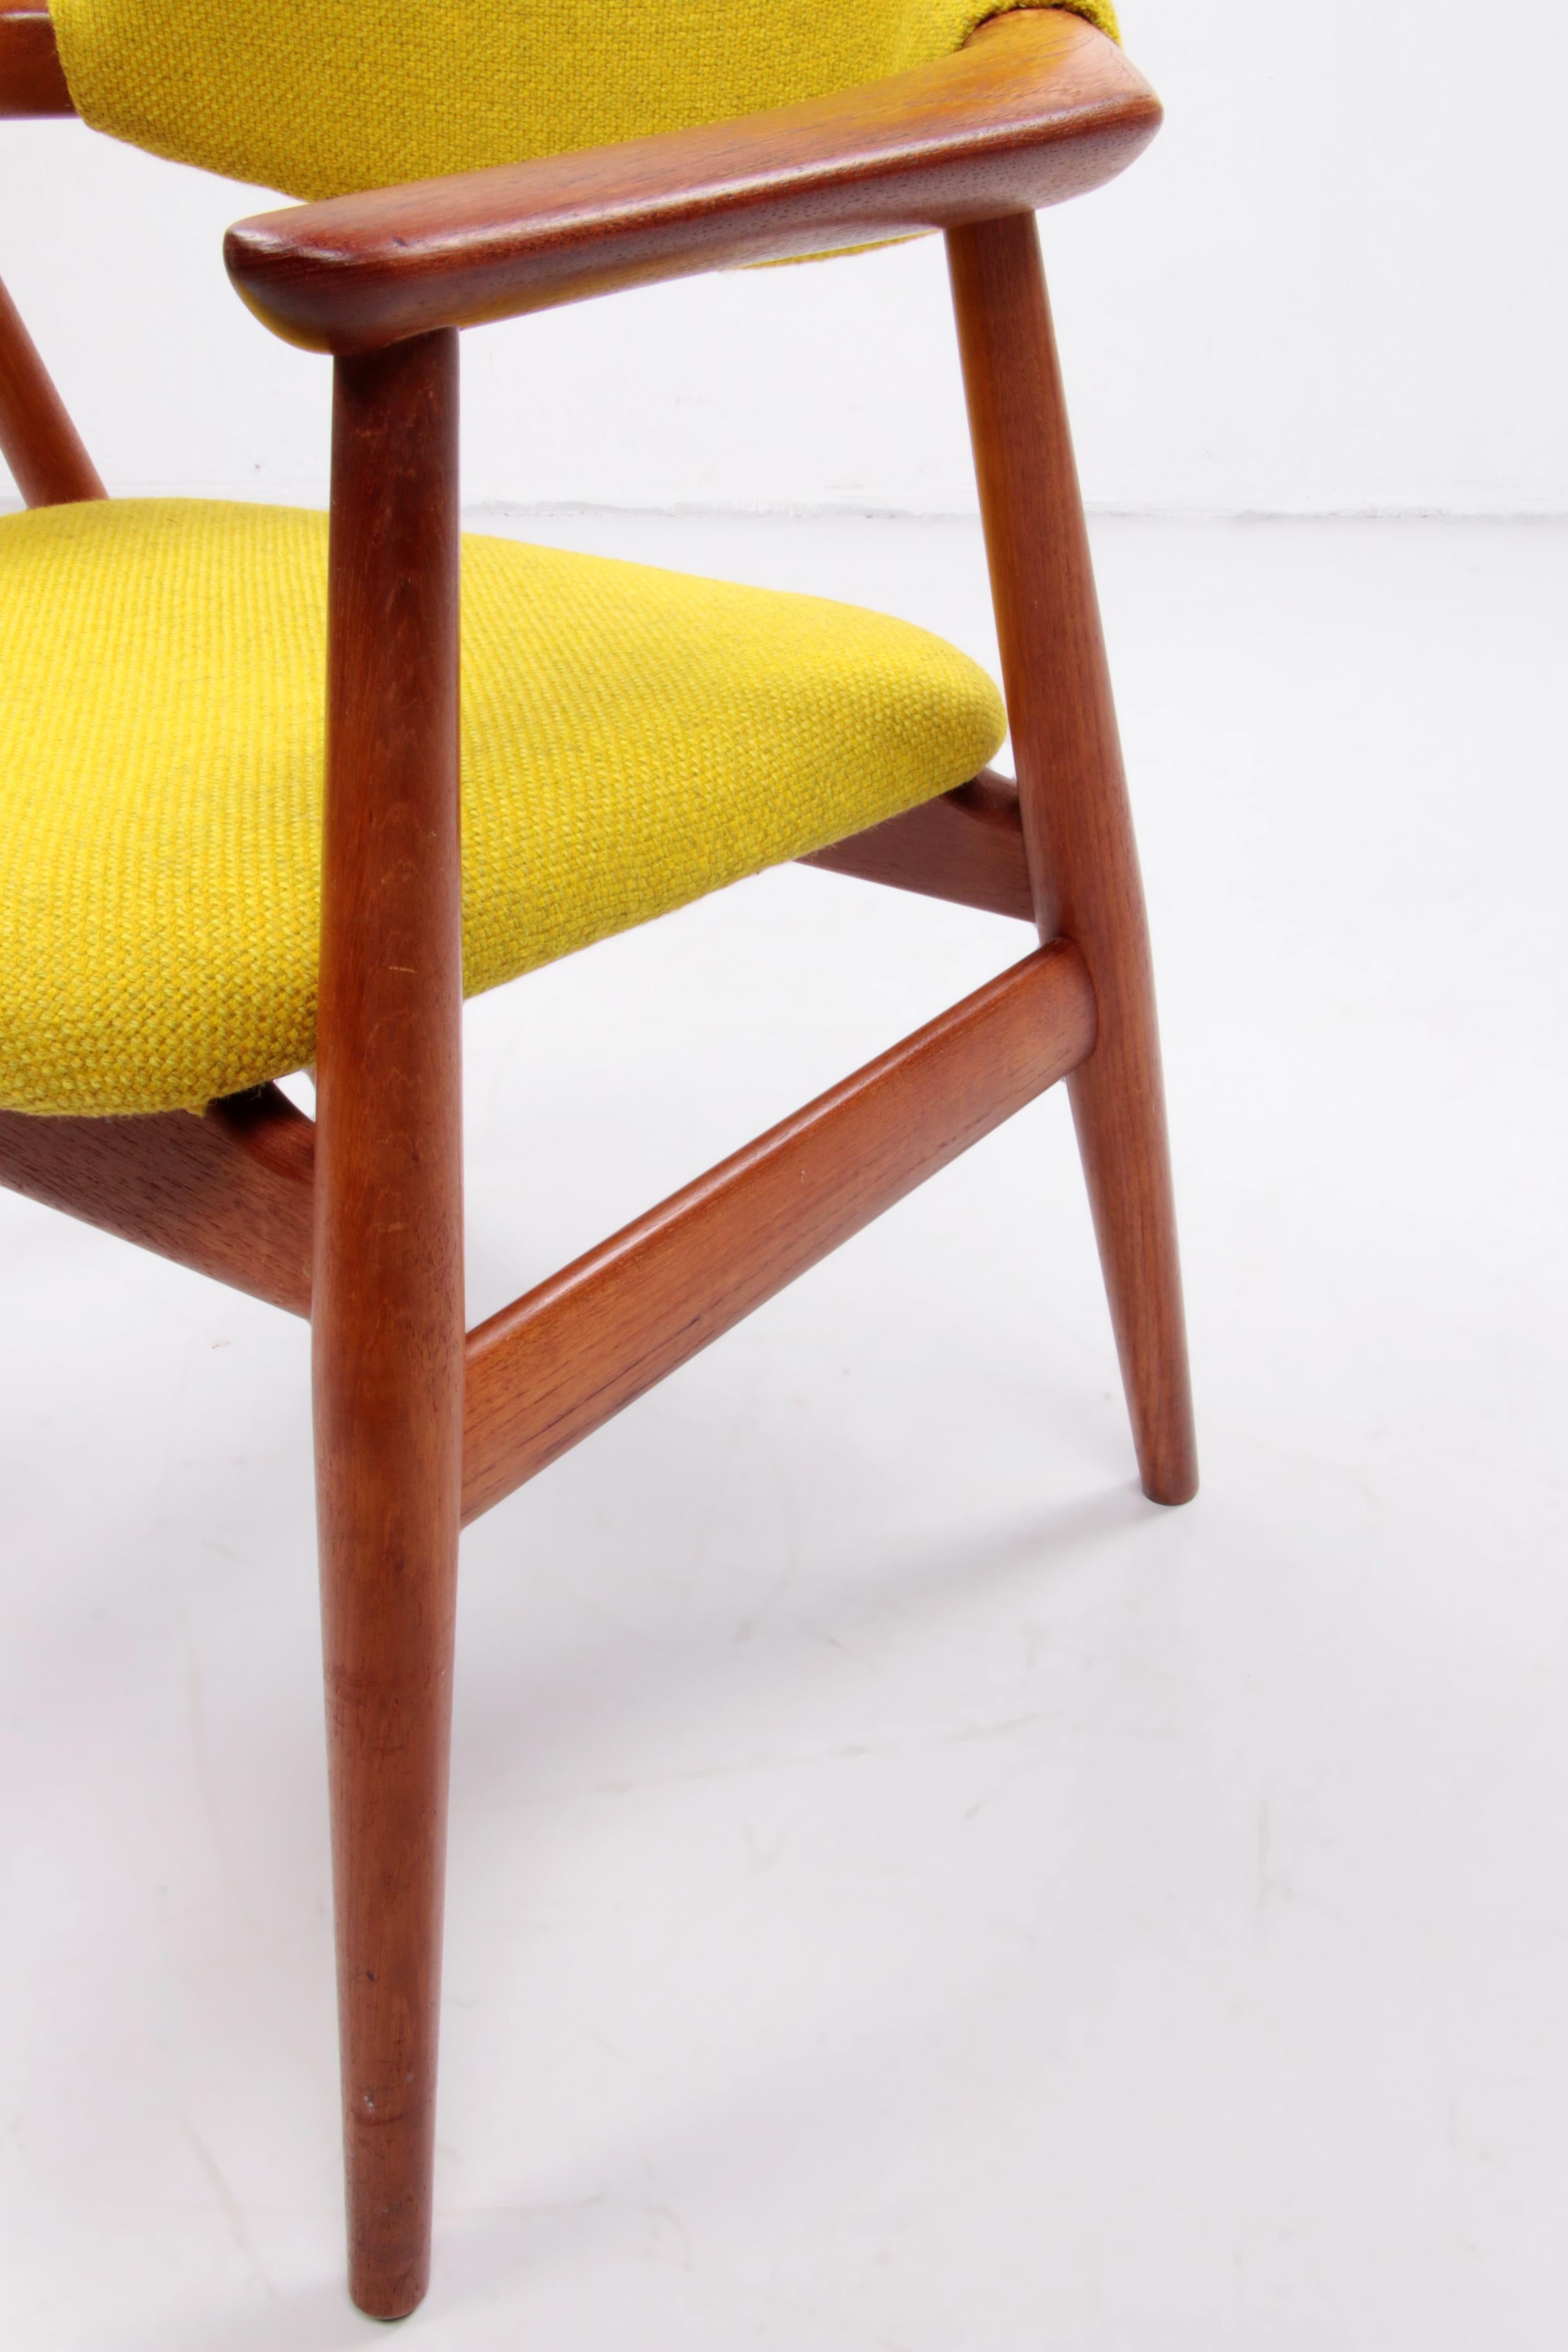 Danish Dining Room Chair by Svend Age Eriksen Model Gm11, 1960s 4